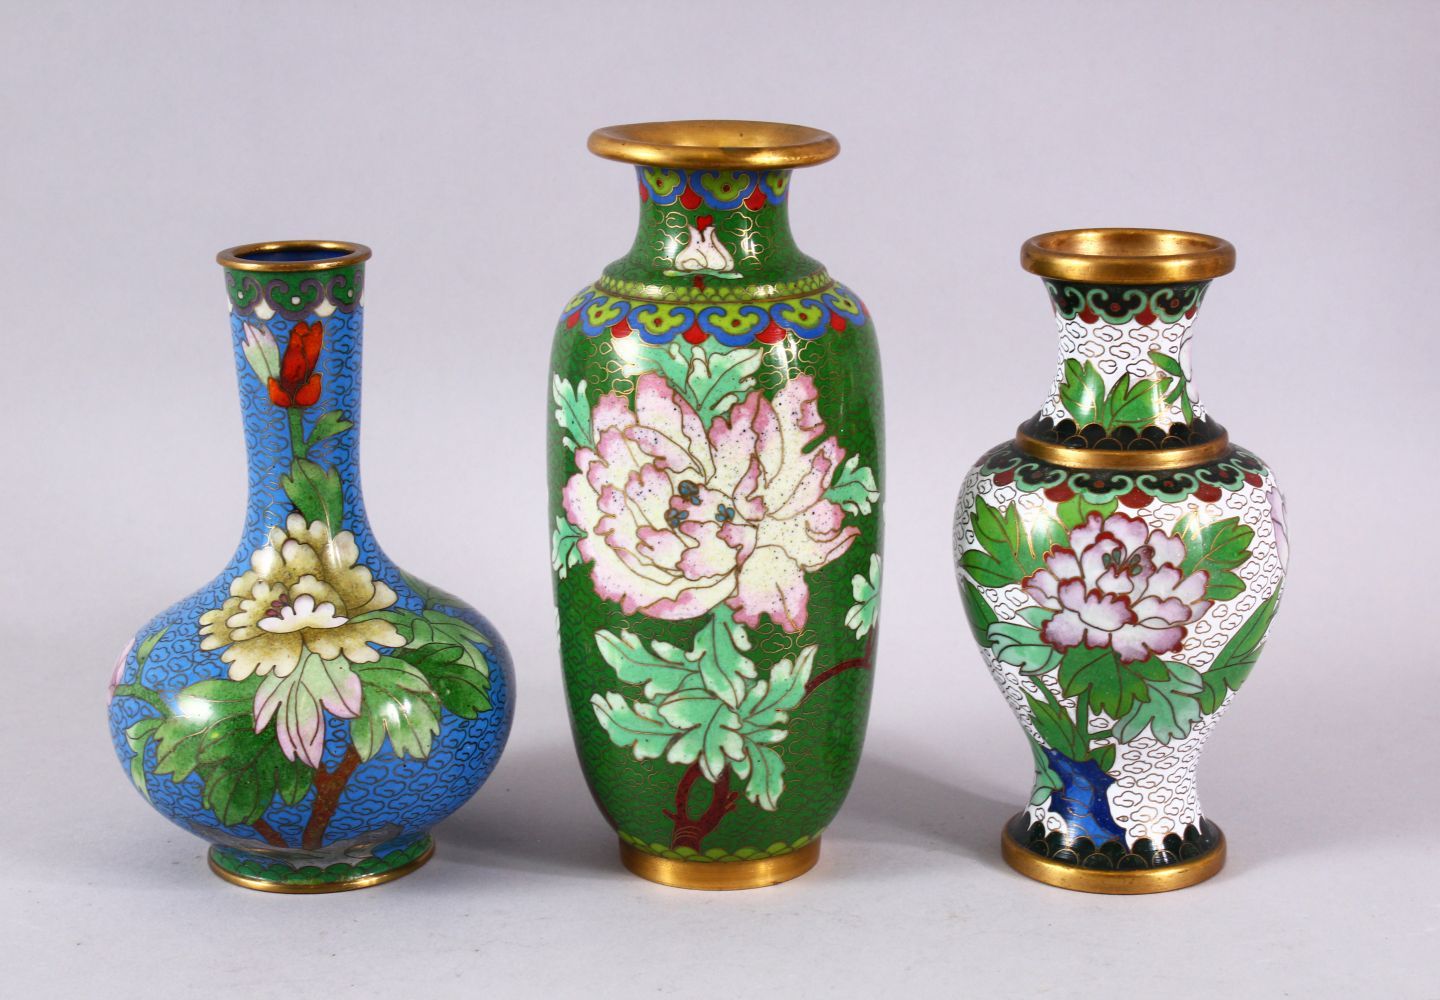 A MIXED LOT OF THREE CHINESE CLOISONNE VASES - the largest with a green ground with native Lotus